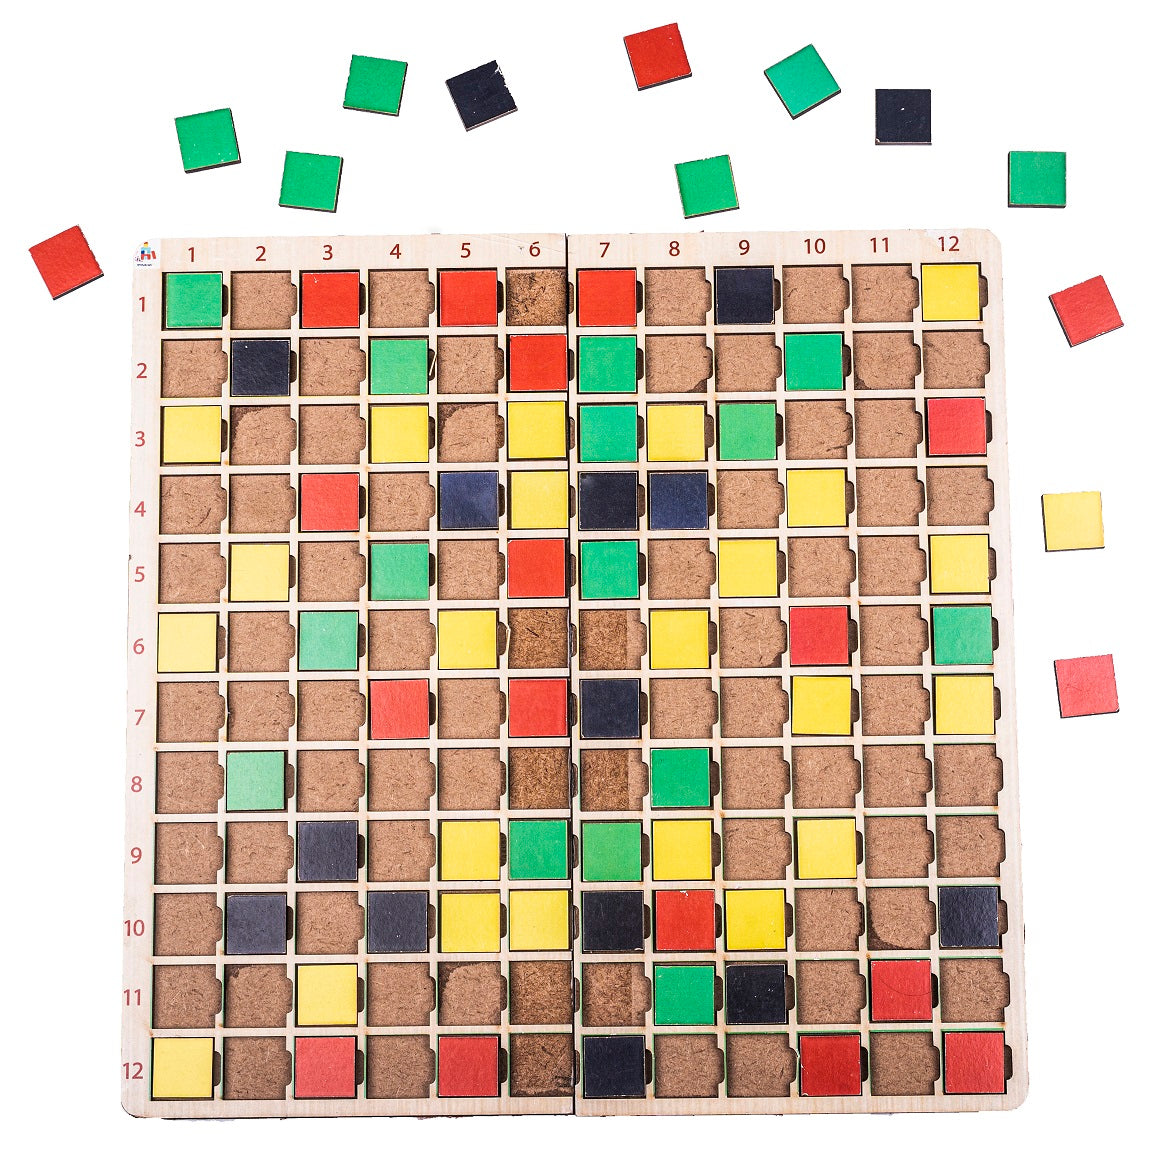 Buy Symmetry Tile Matching Activity Game   - SkilloToys.com